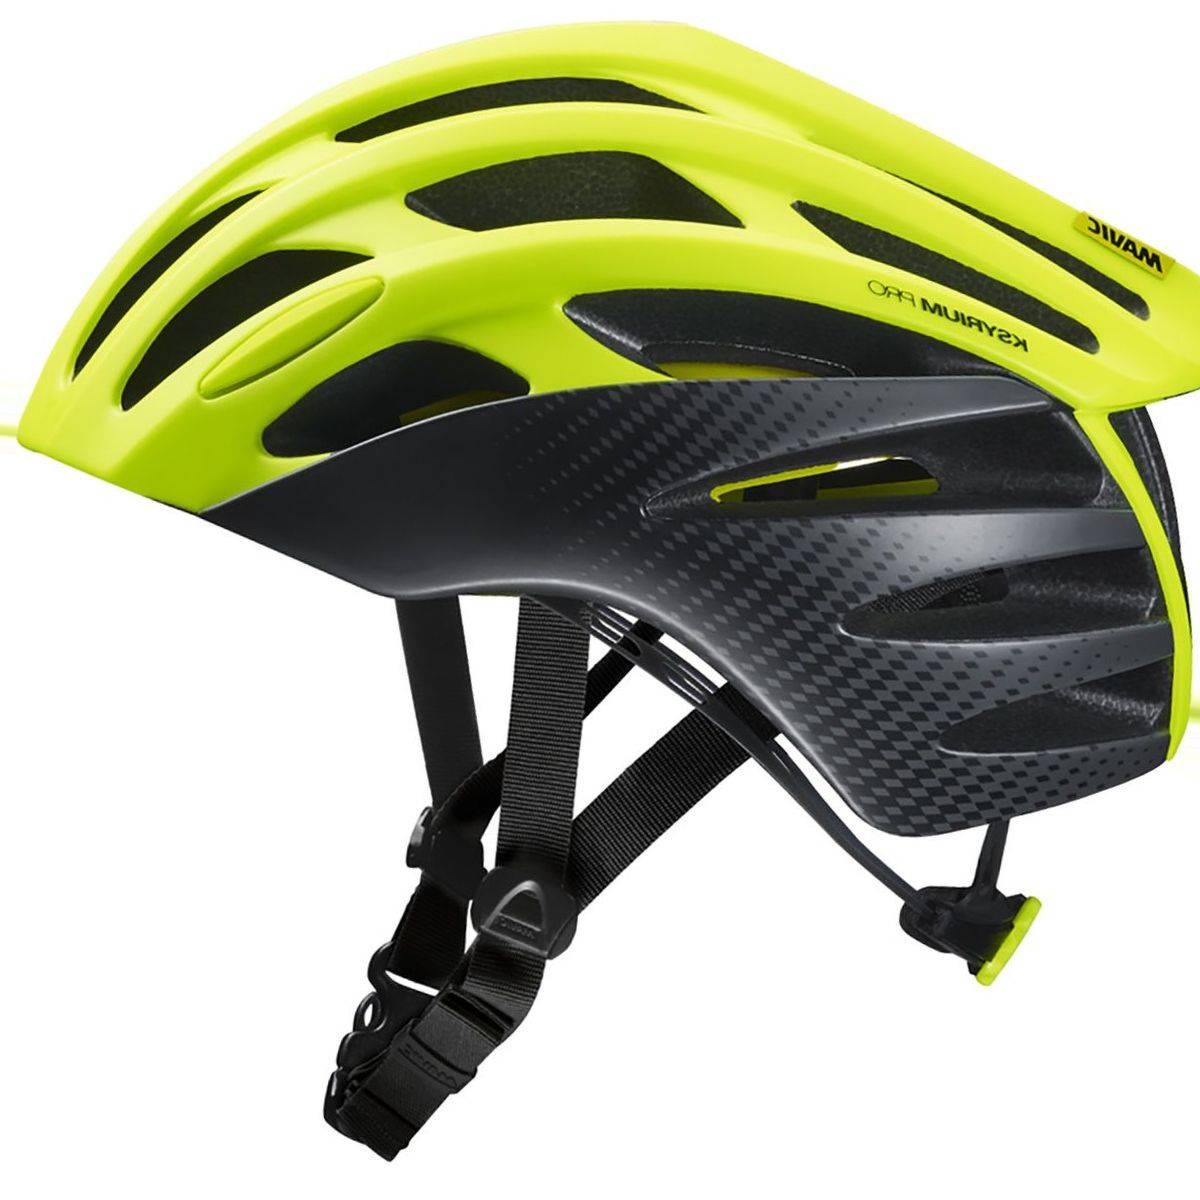 7 Good Bike Helmets And Protection For Man In 2019